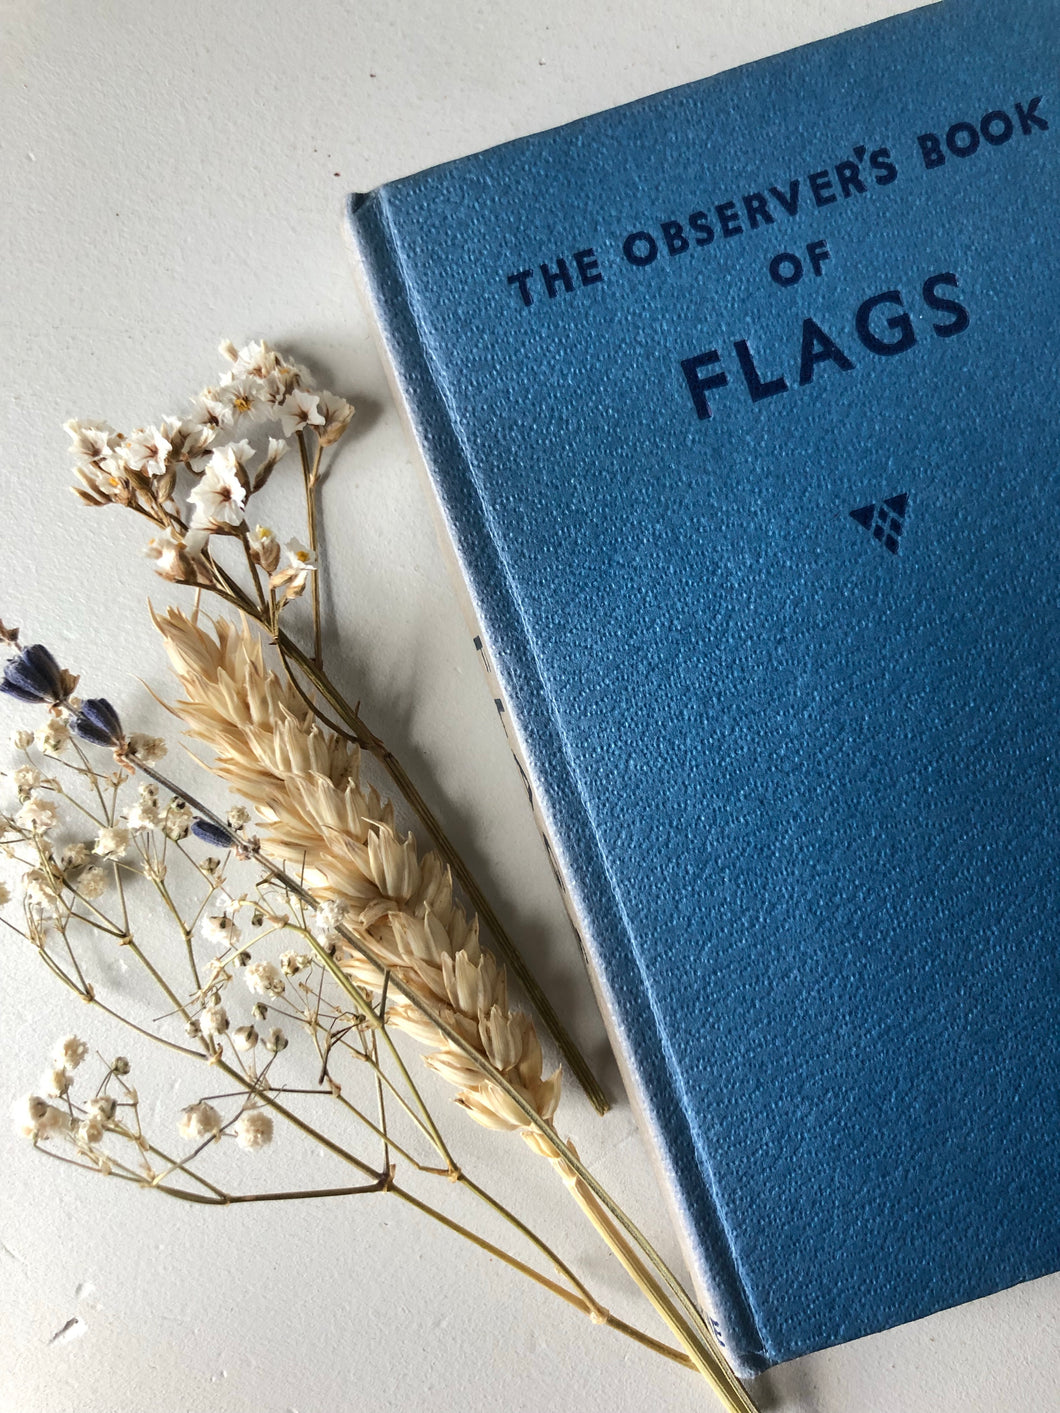 Observer Book of Flags